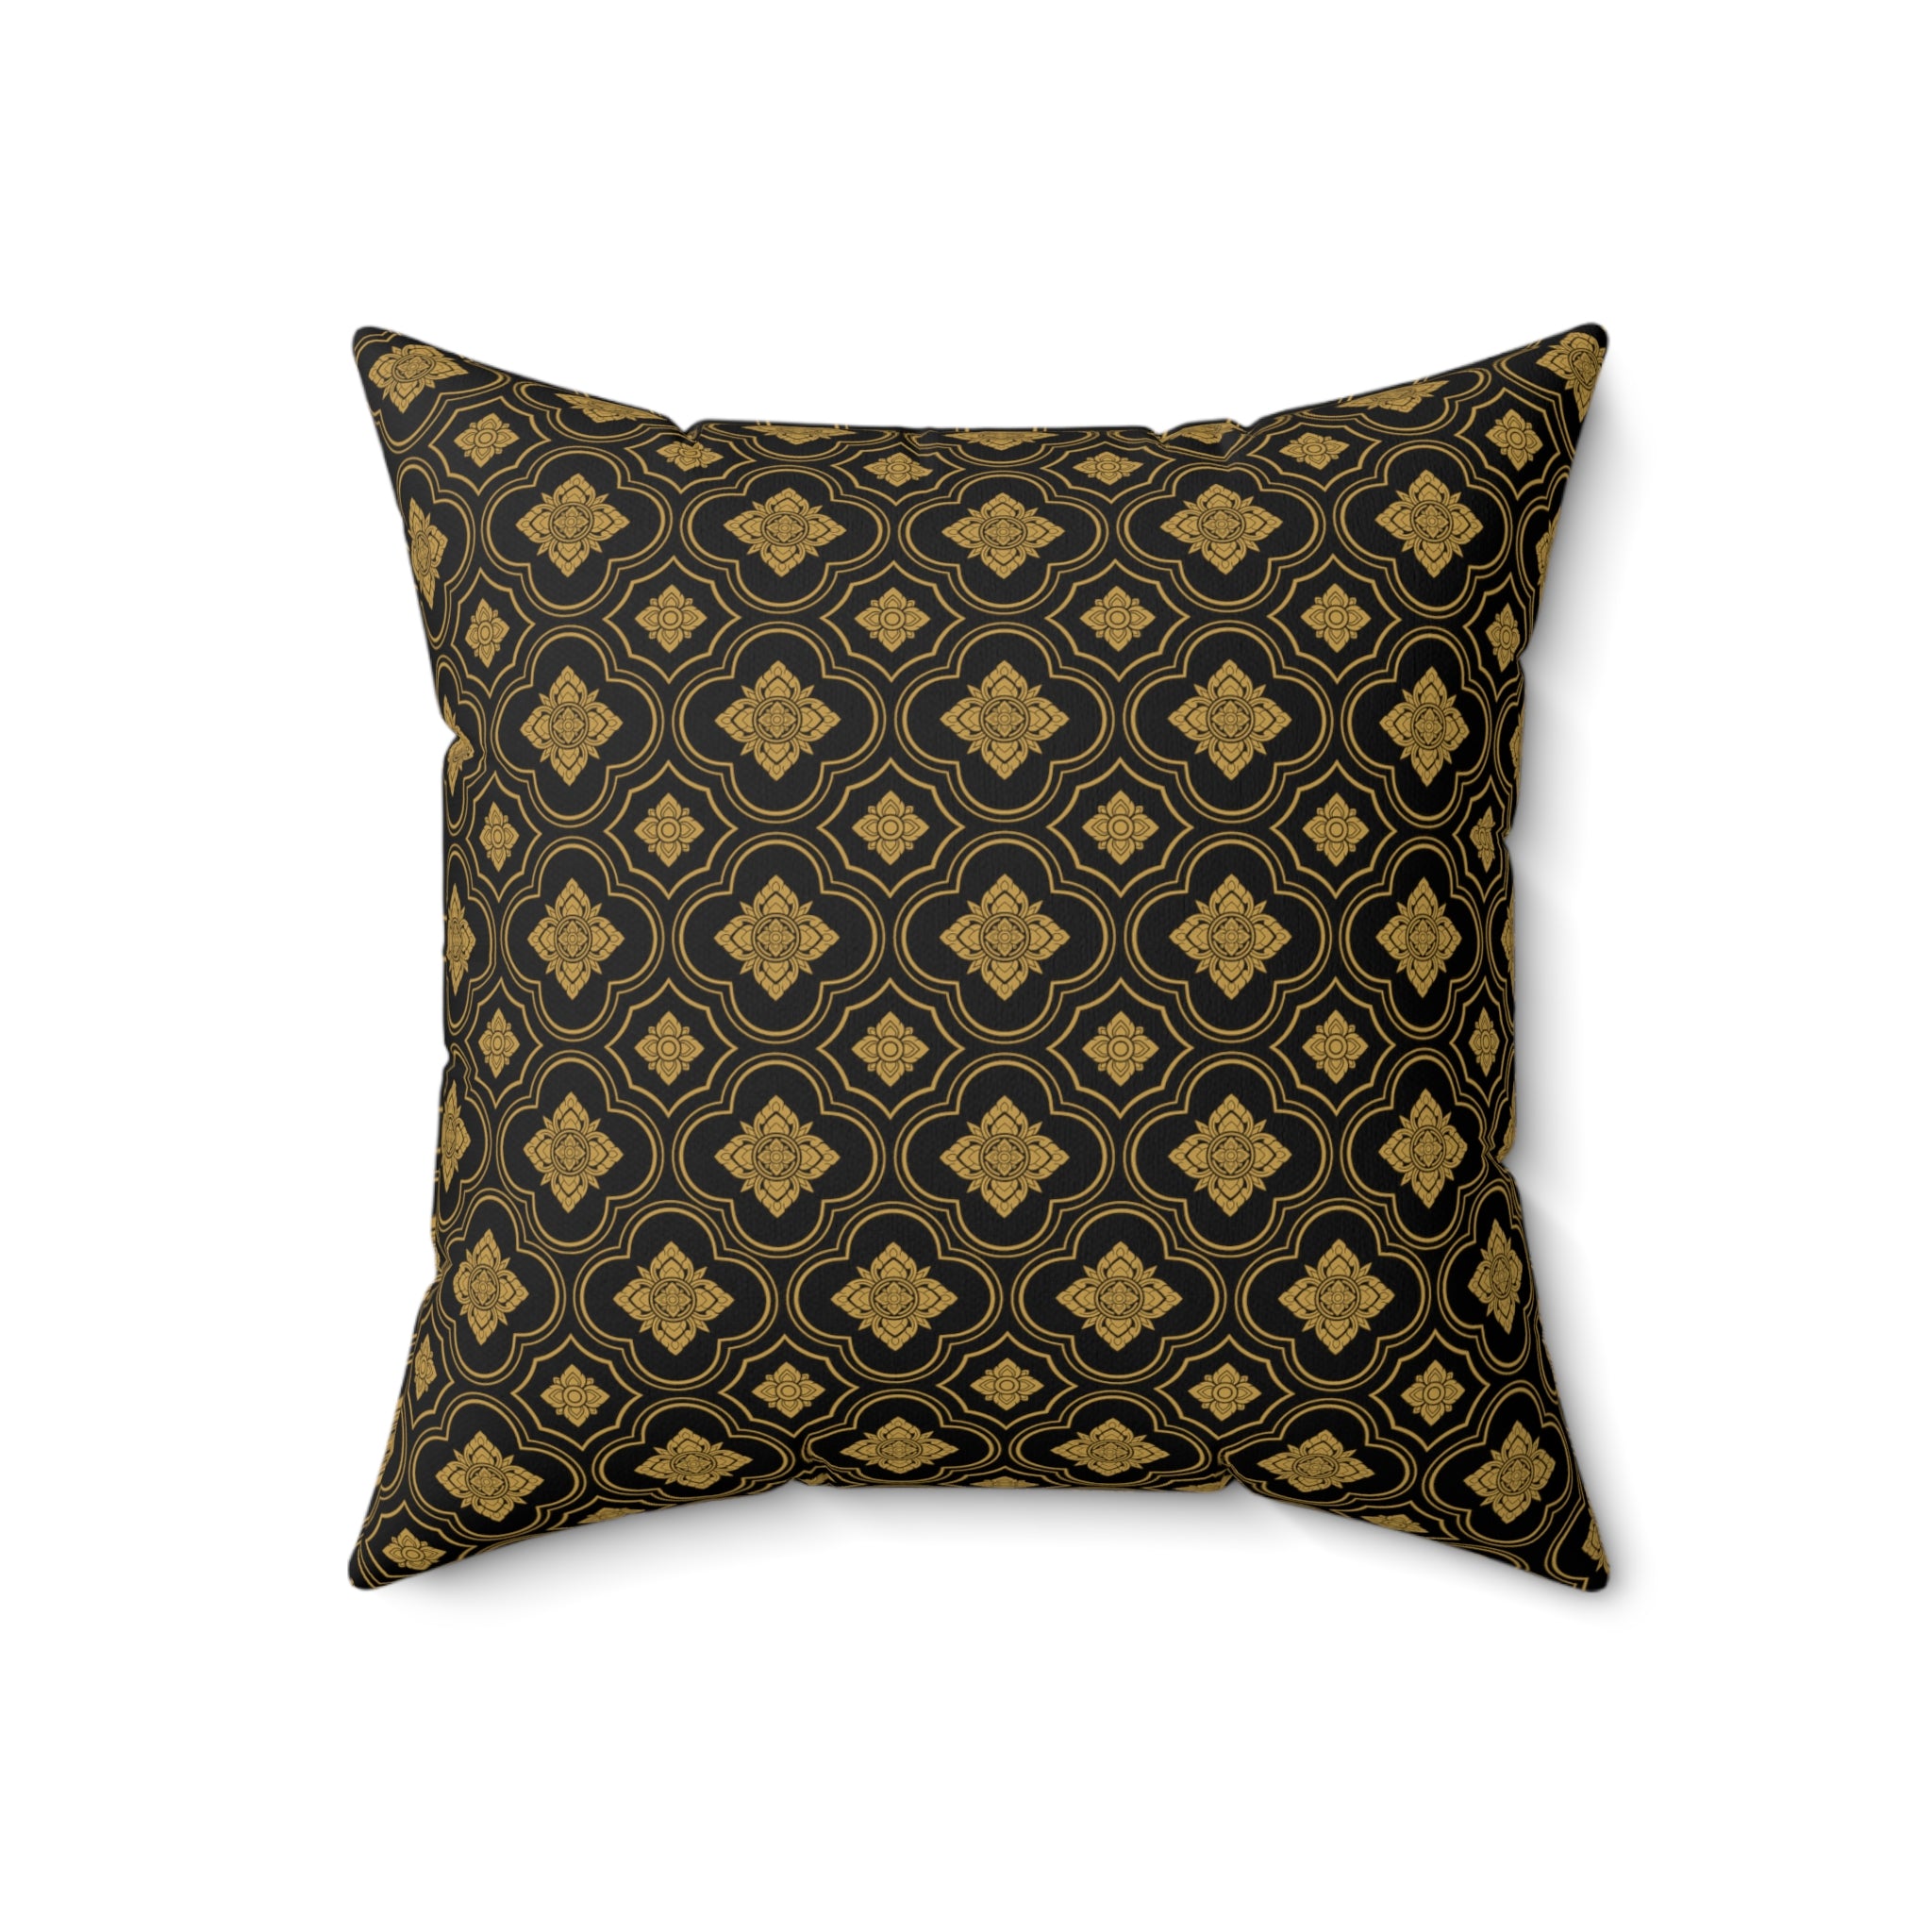 Golden Polyester Square Pillow